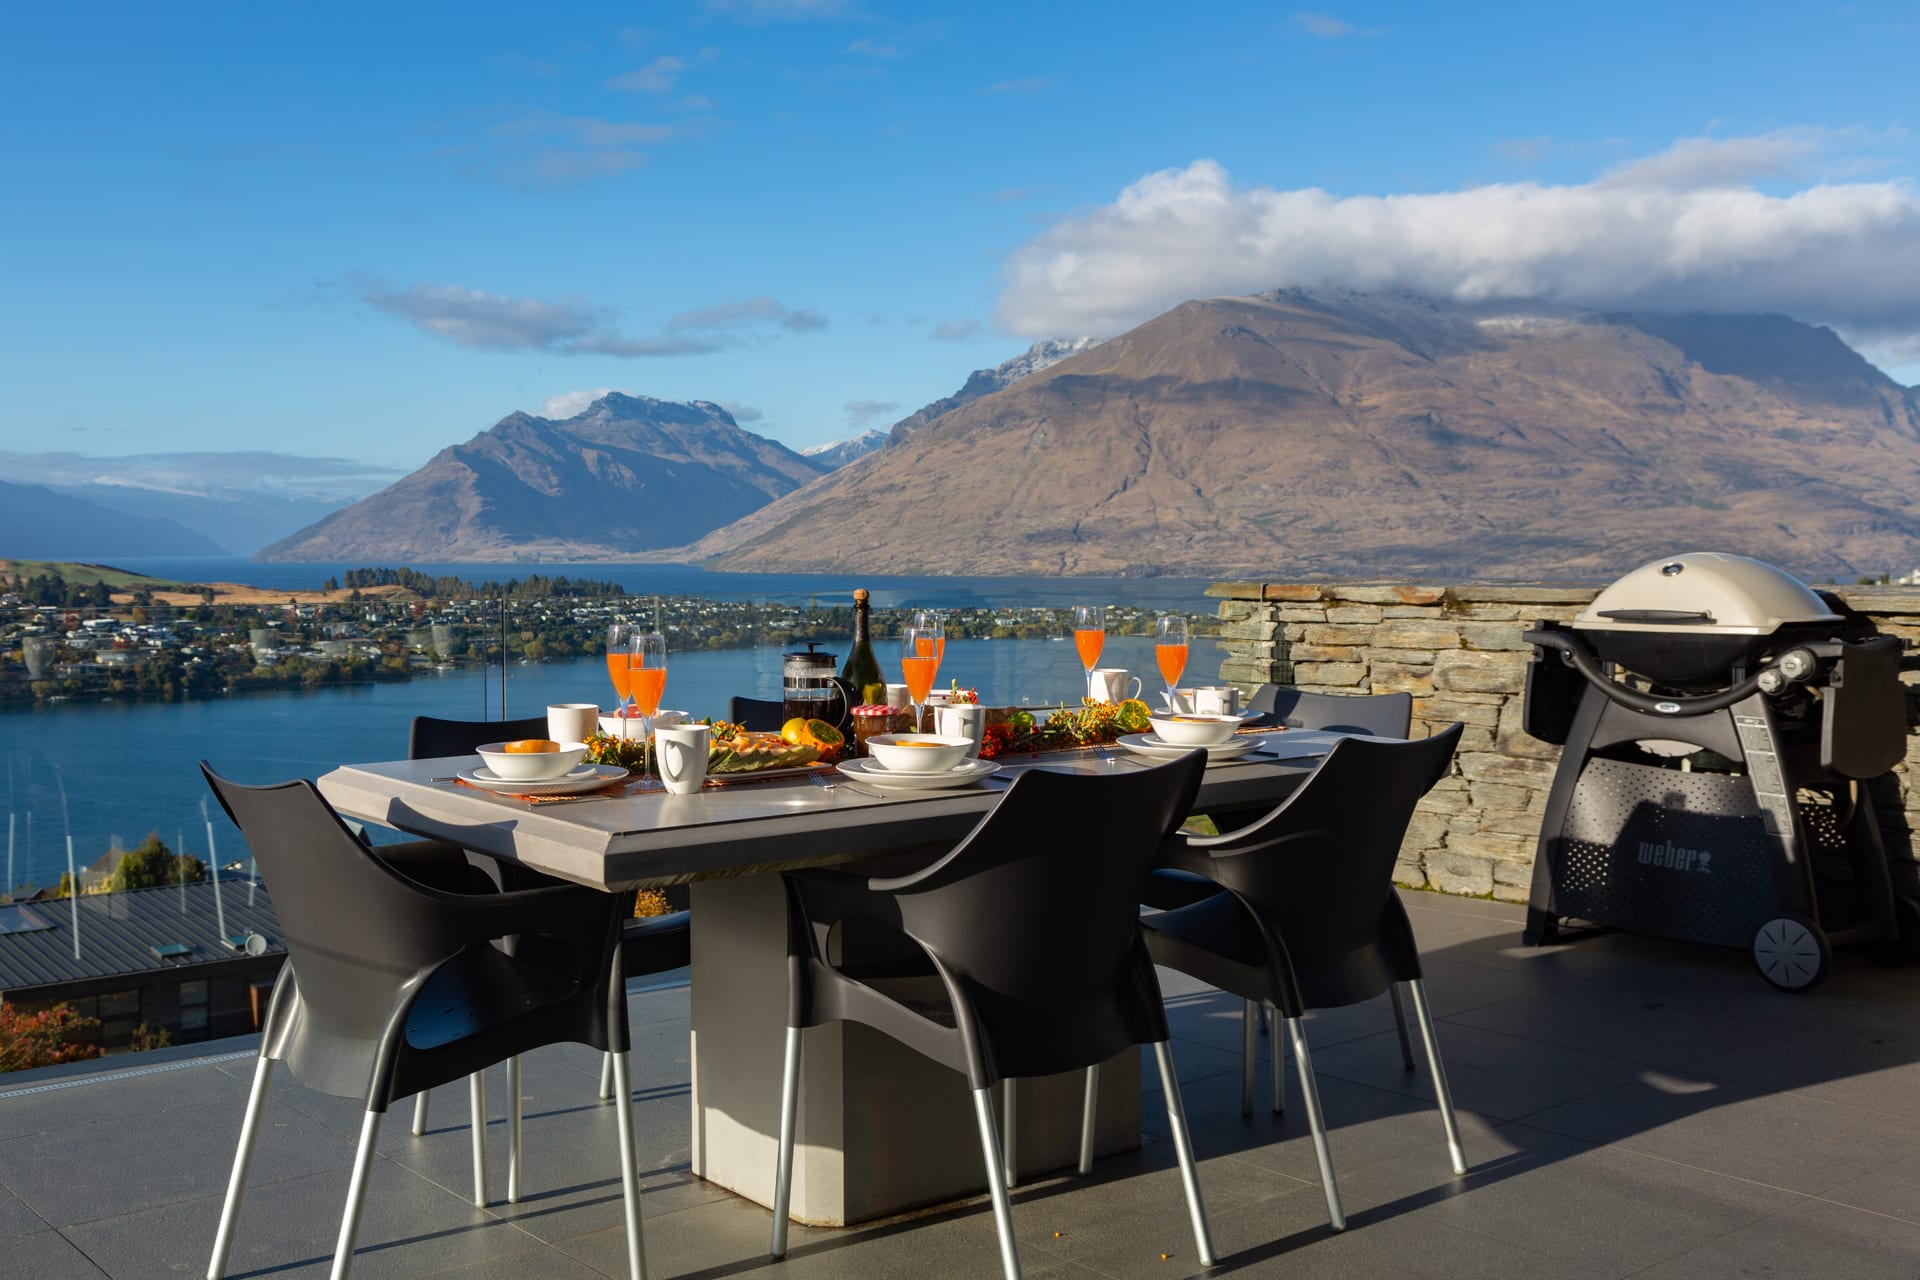 What better spot to enjoy your meals with this stunning view